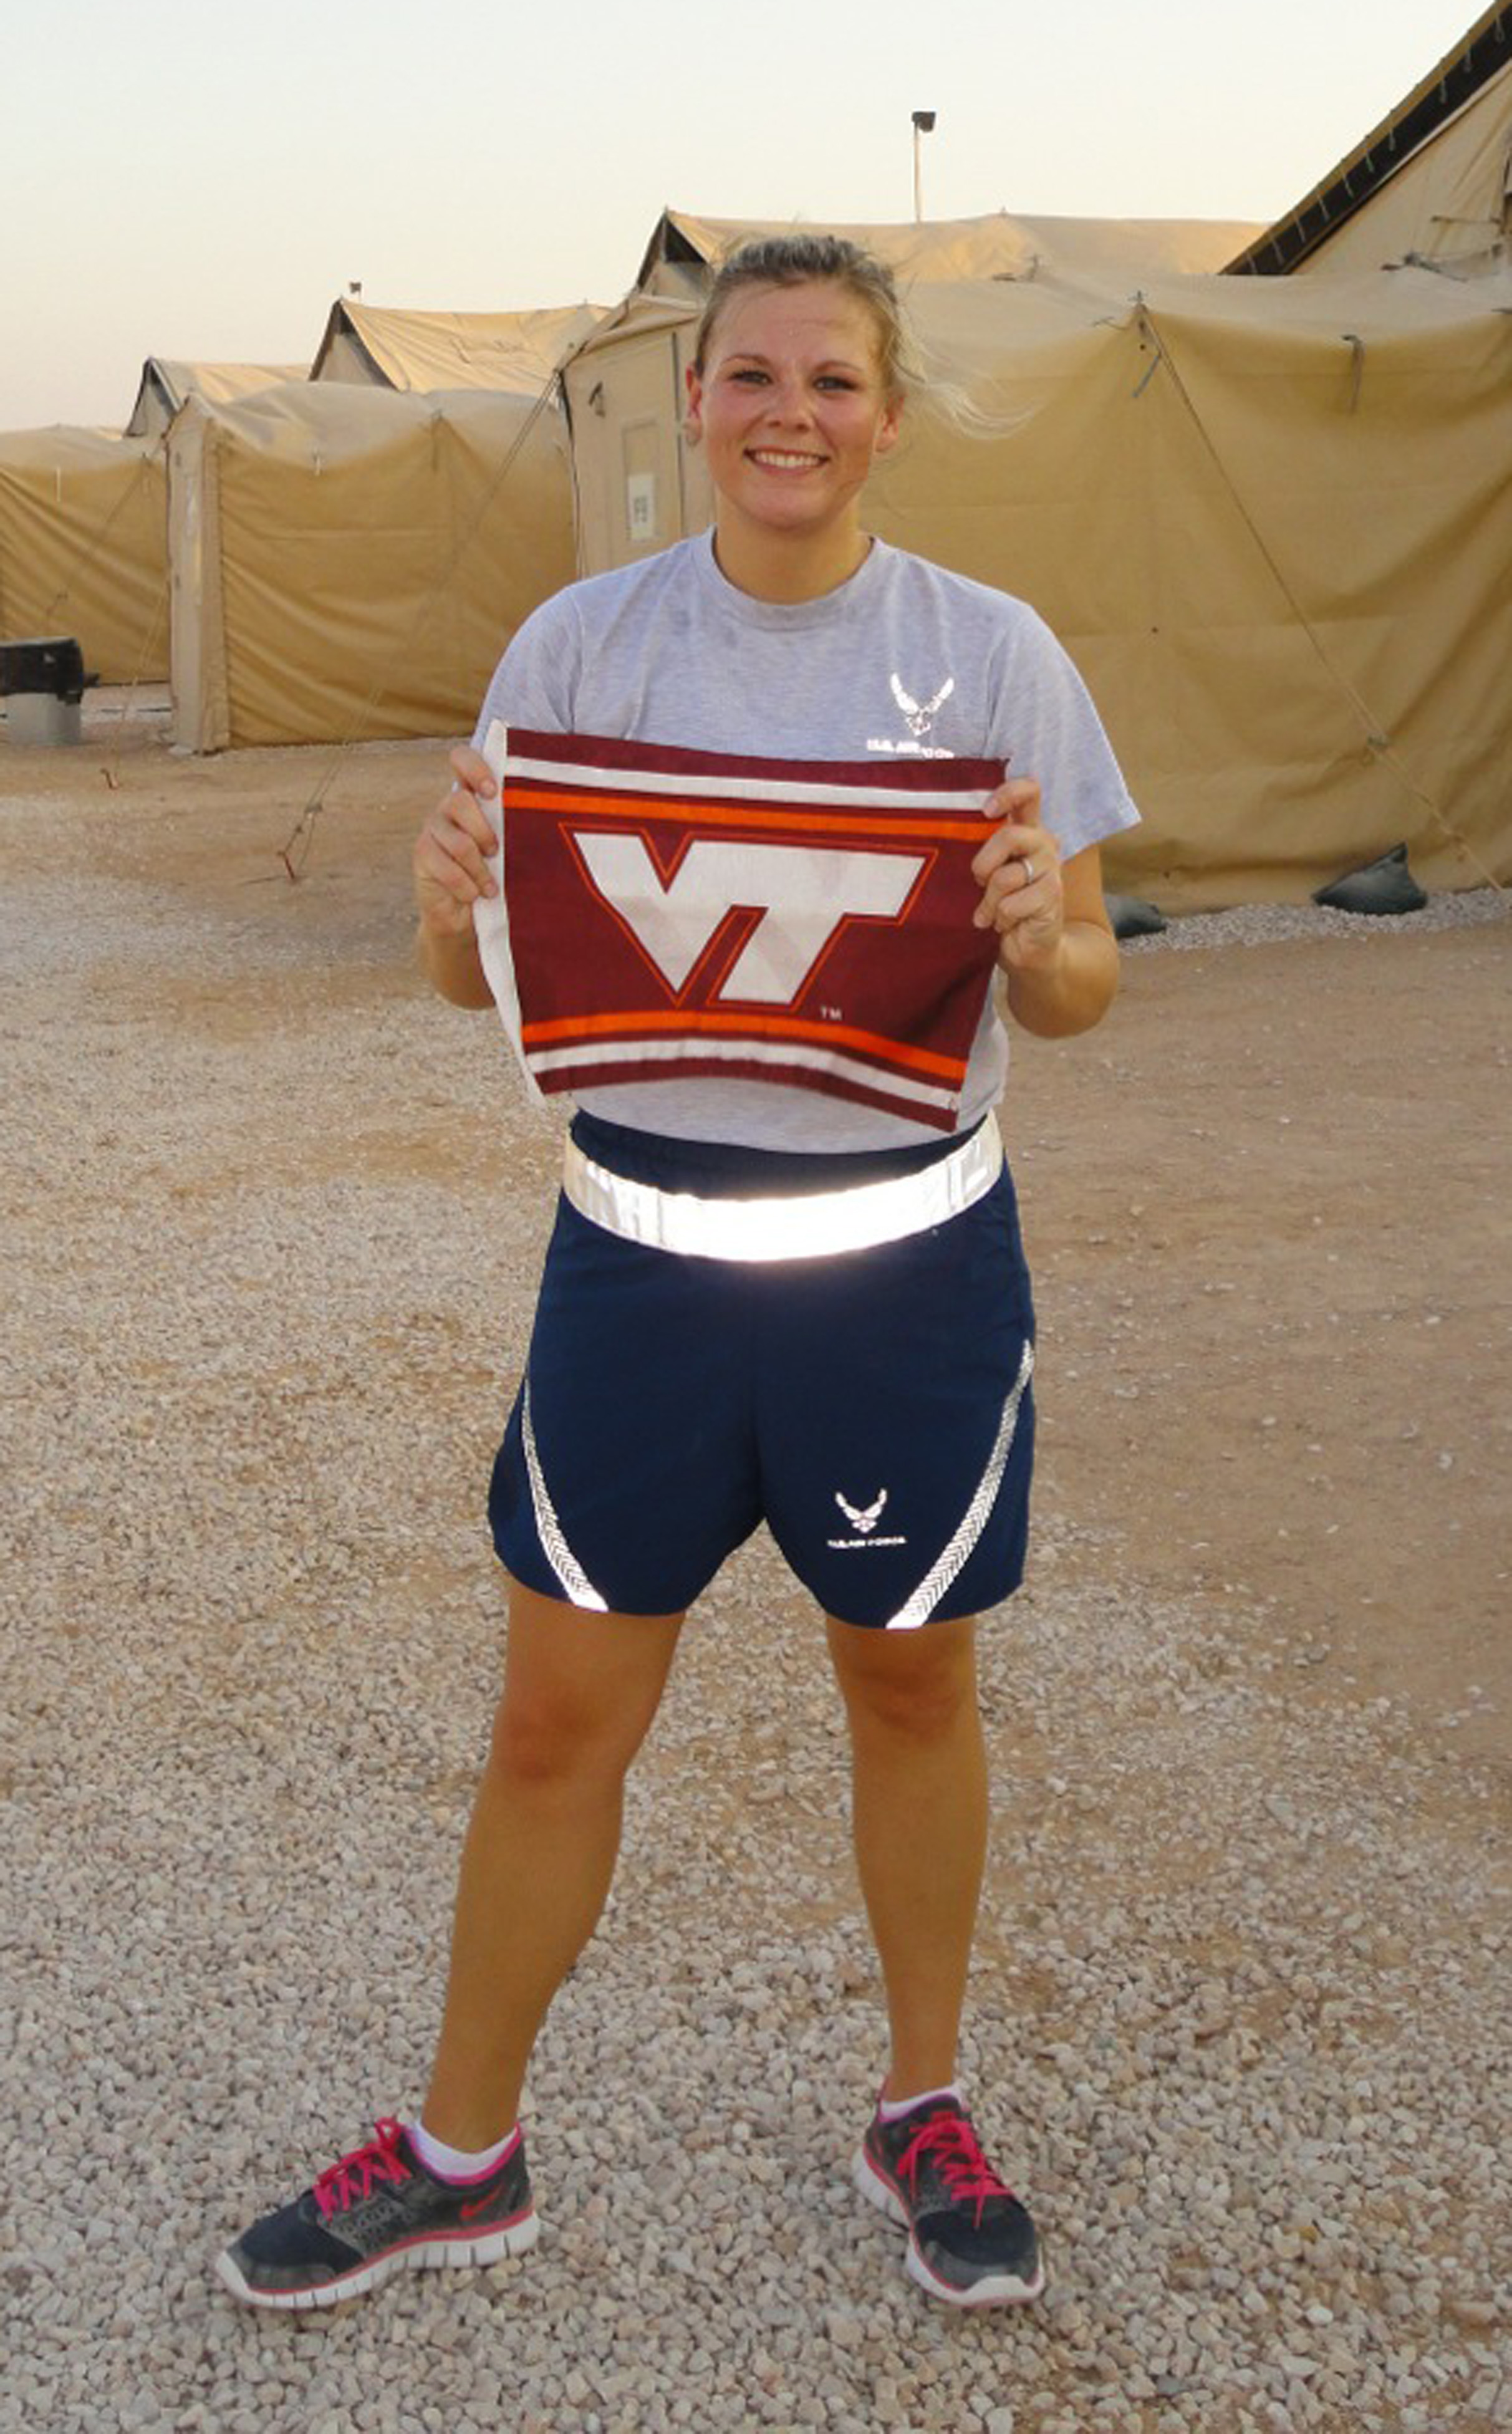 2nd Lt. Tavia Carlson, U.S. Air Force, Virginia Tech Corps of Cadets Class of 2009 shown from her deployed location last April 16 after running a personal 3.2-Mile Run in Remembrance as a show of support to her fellow Hokies.